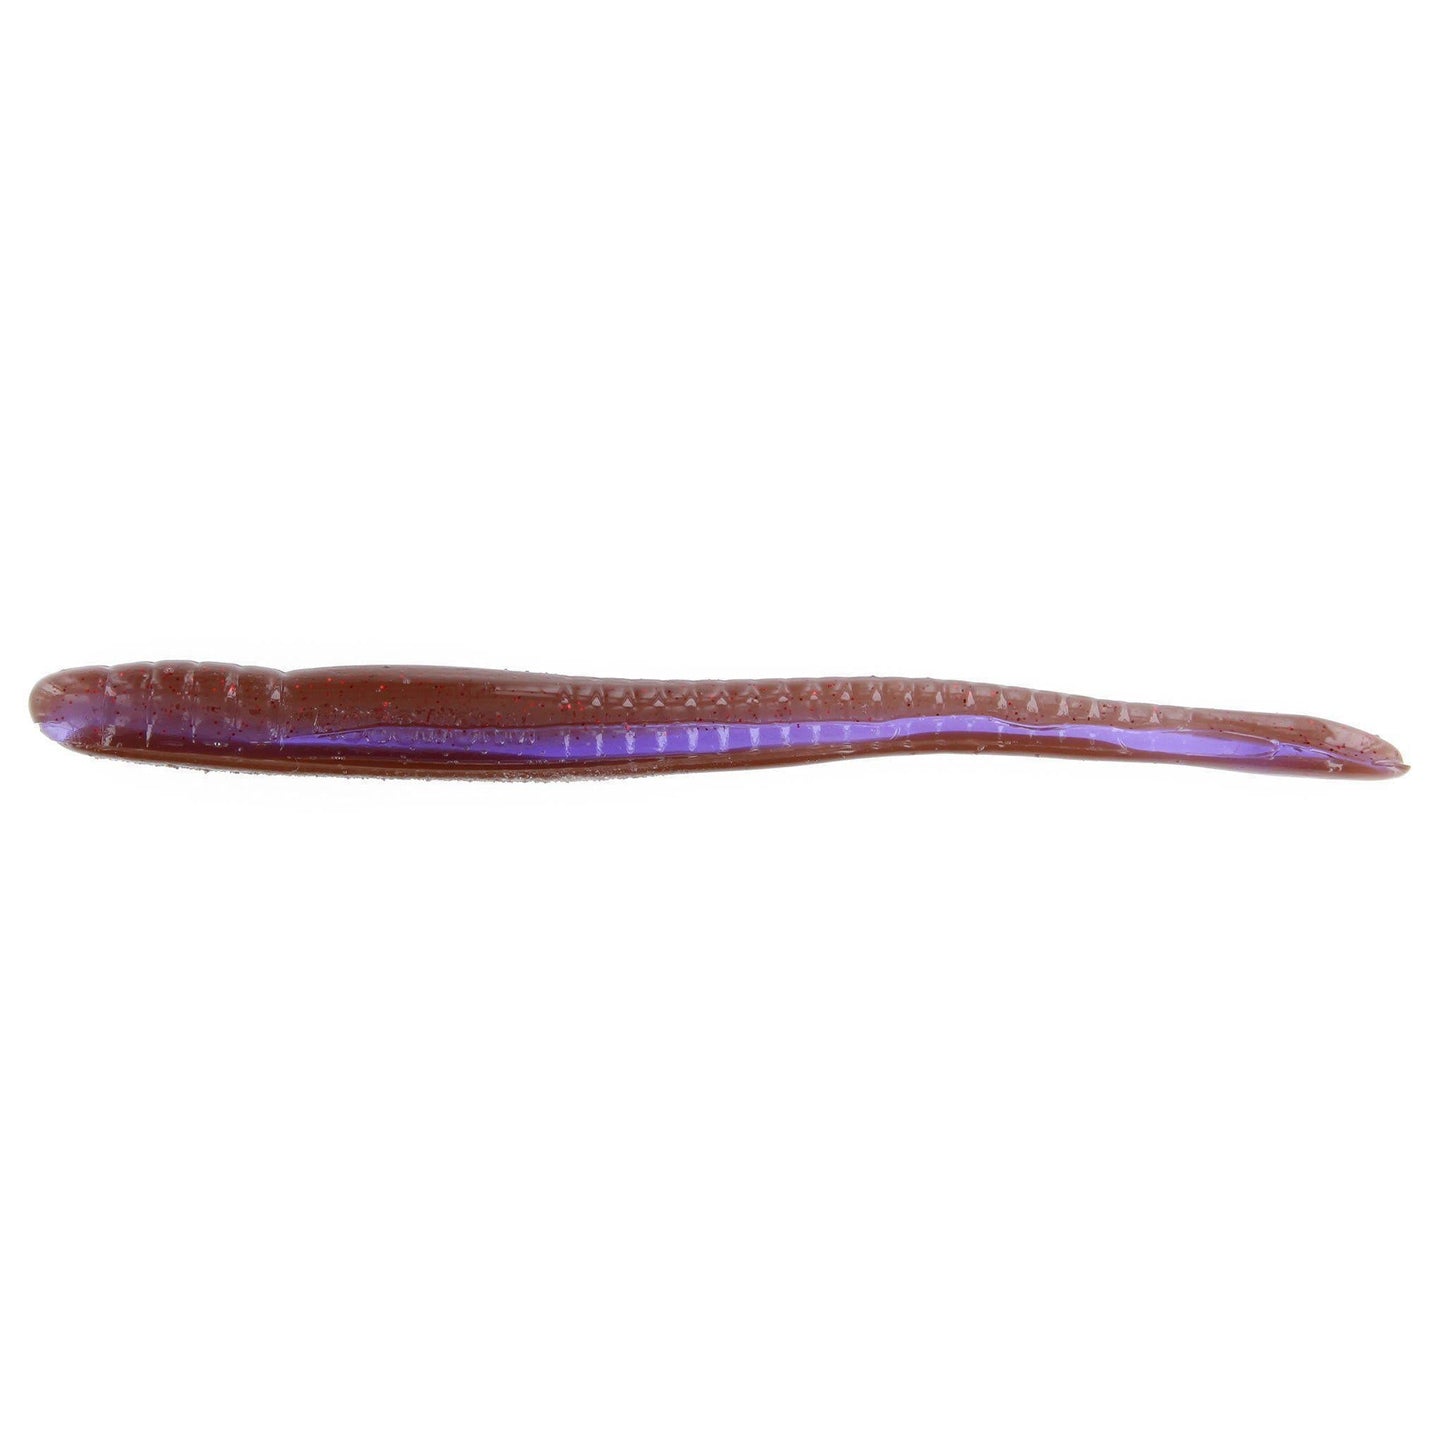 Roboworm Fat Straight Tail 4.5 Sk-A2Ar Oxblood Light/Red Flake 8Pk –  Hammonds Fishing